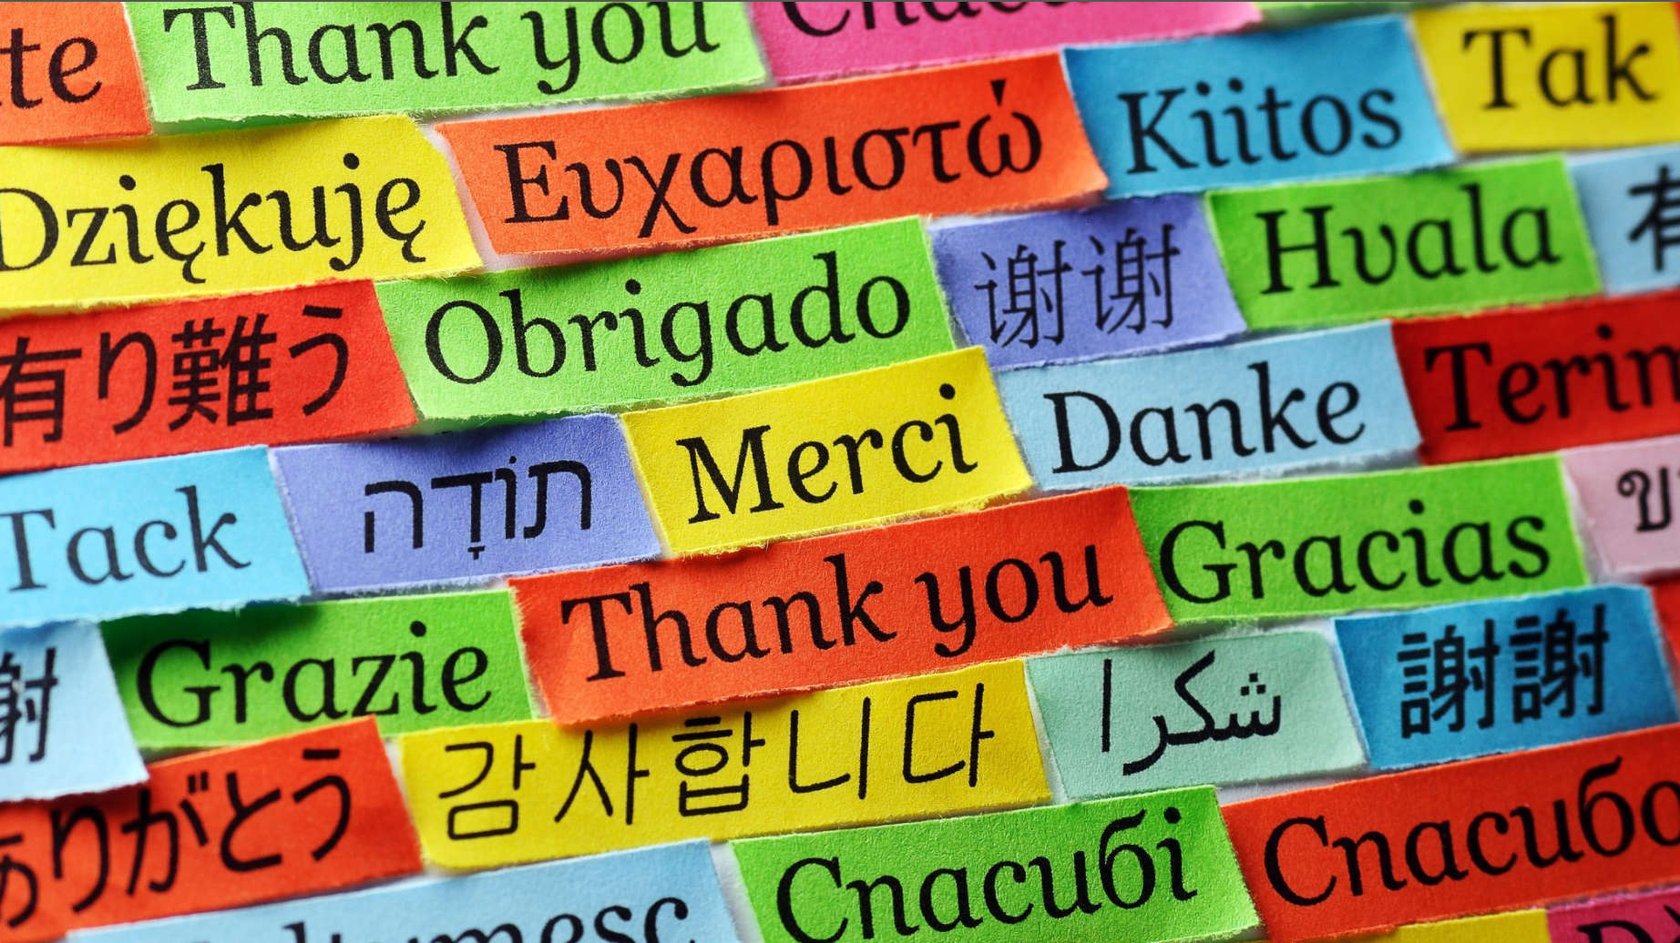 Thank you written in several languages